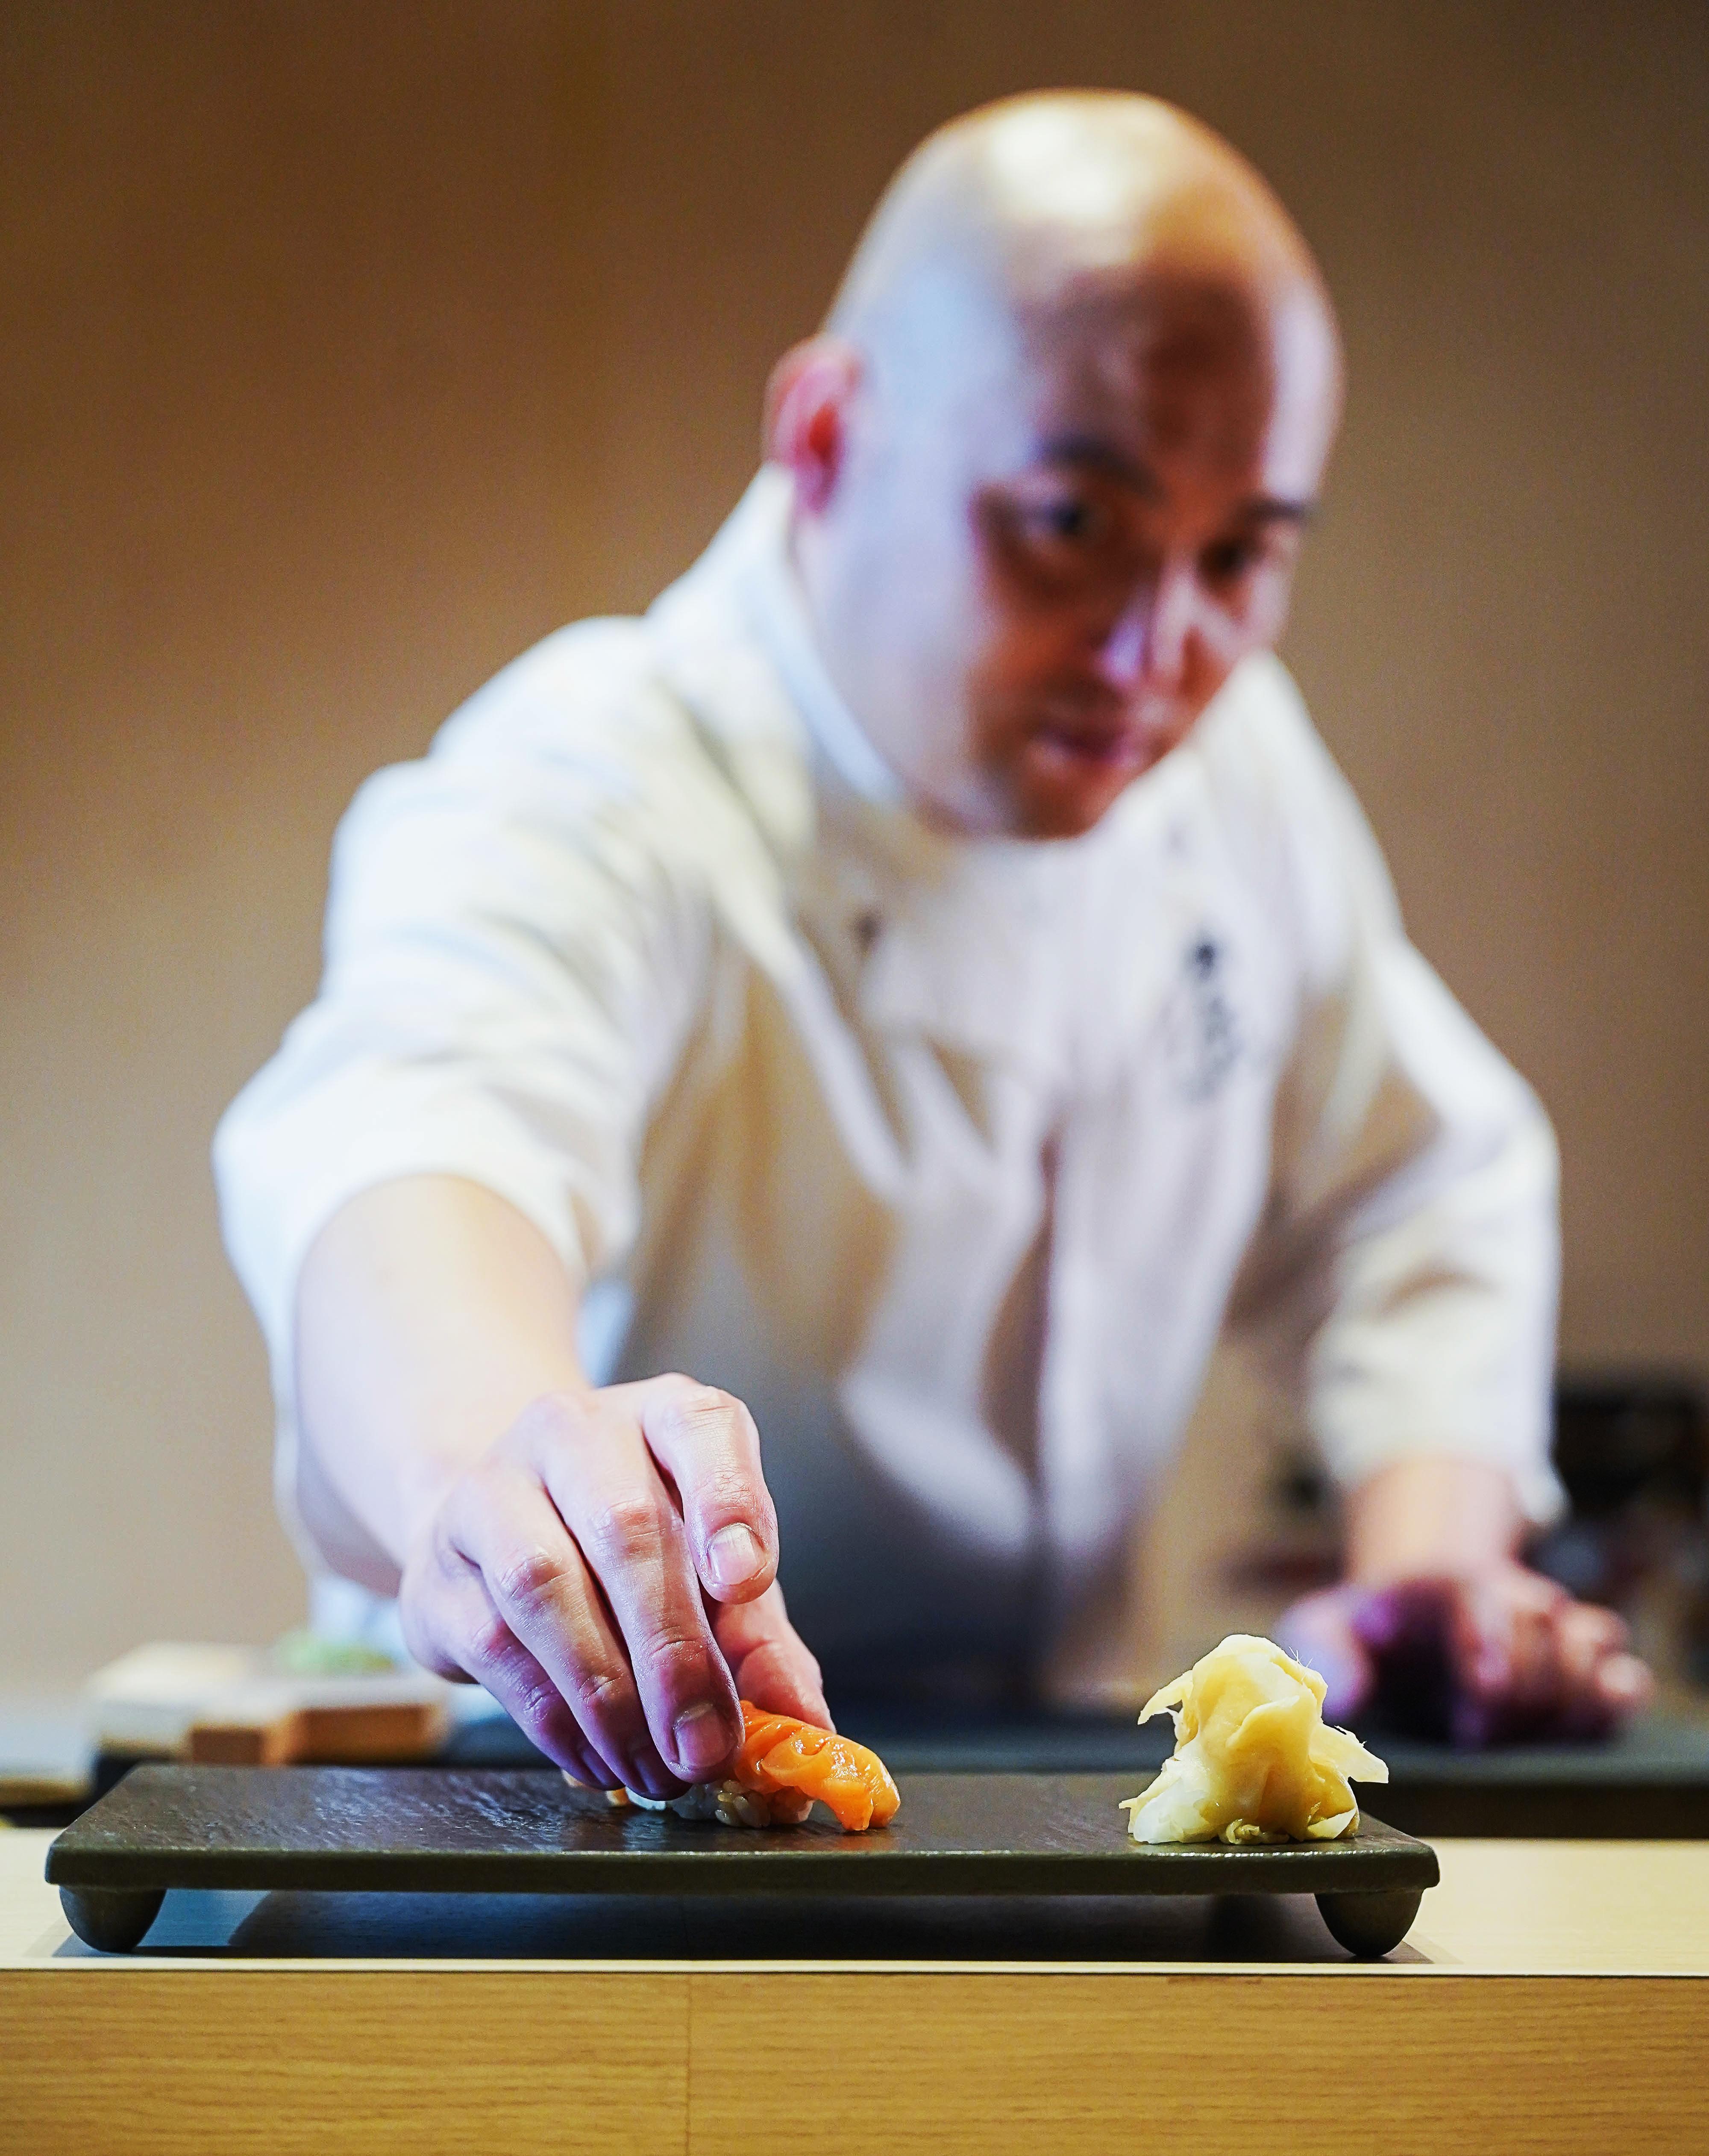 Watch Every Tool A Sushi Chef Uses For A 30-Course Omakase